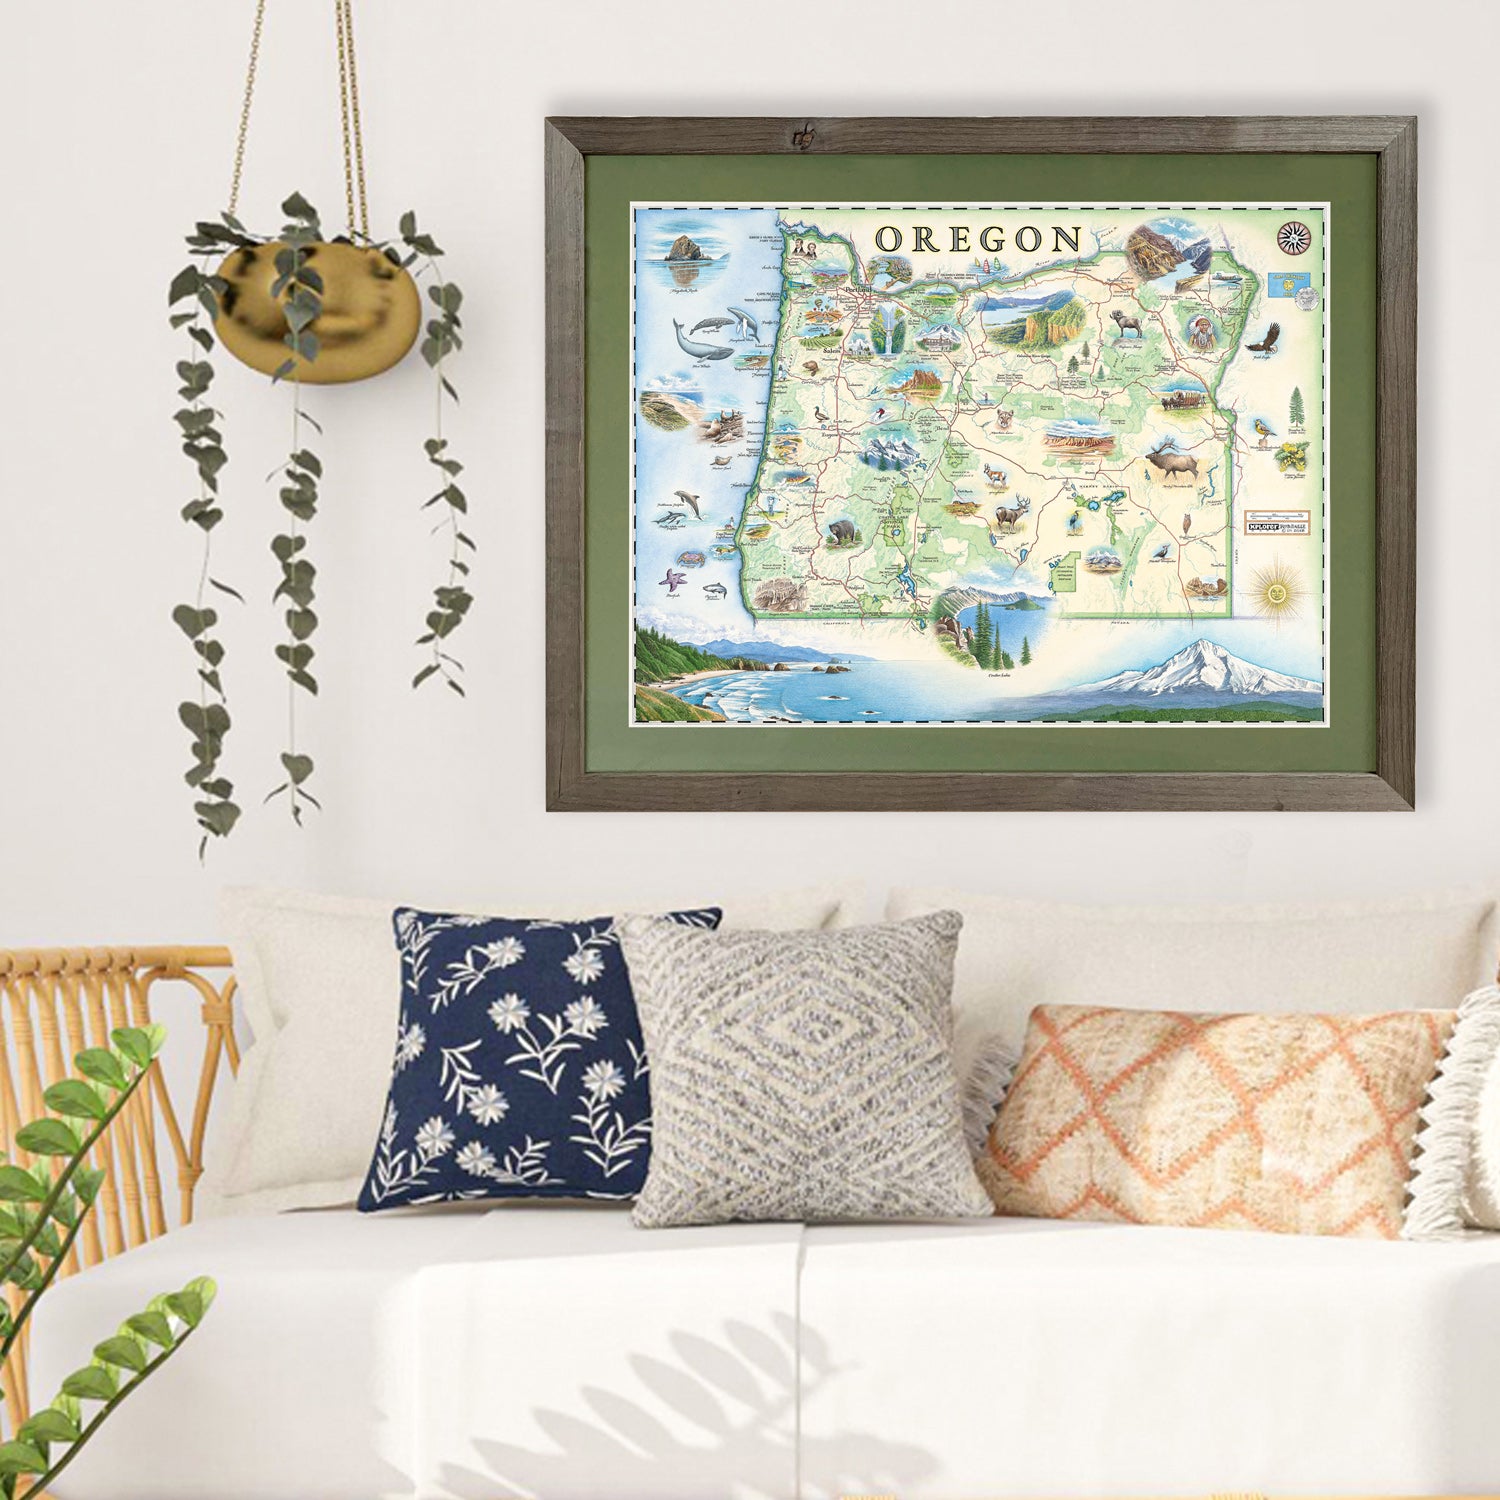 Xplorer Maps state map of Oregon hangs in a living room above a couch, a plant hangs from the ceiling beside the framed print.